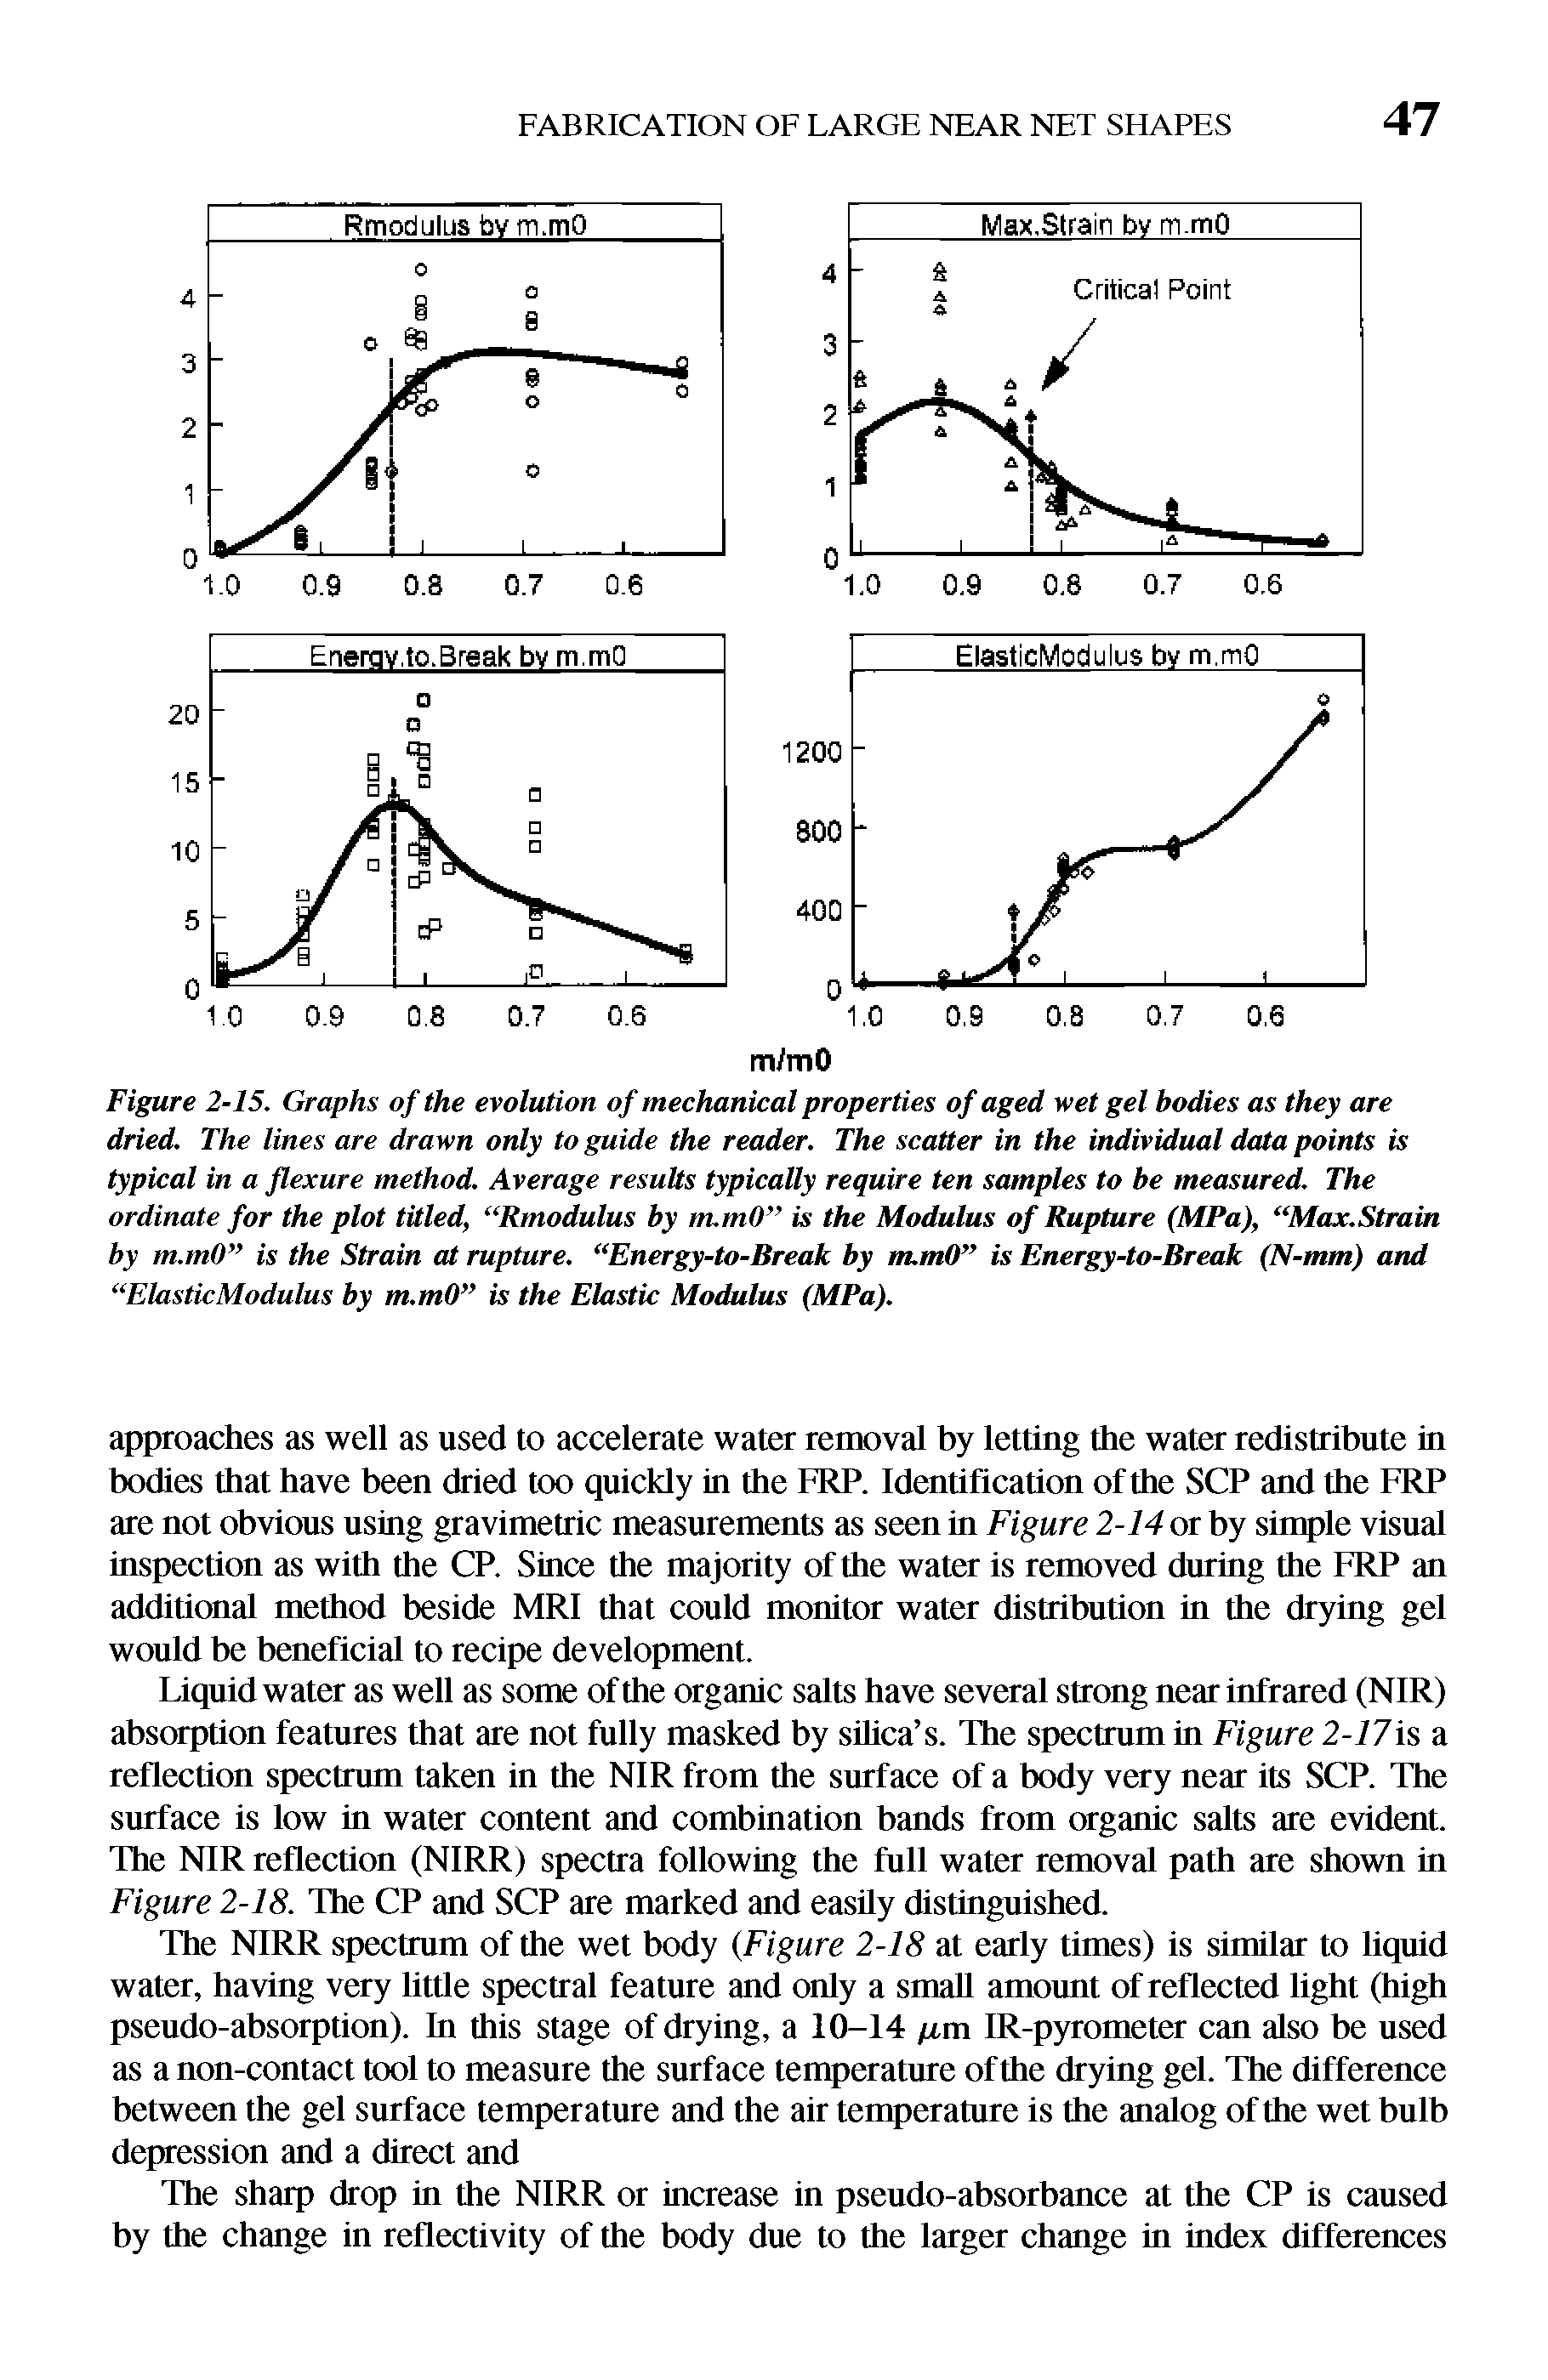 Figure 2-15. Graphs of the evolution of mechanical properties of aged wet gel bodies as they are dried. The lines are drawn only to guide the reader. The scatter in the individual data points is typical in a flexure method. Average results typically require ten samples to be measured. The ordinate for the plot titled, Rmodulus by numO is the Modulus of Rupture (MPa), Max.Stmin by m.m0 is the Strain at rupture. Energy-to-Break by m.mO is Energy-to-Break (N-mm) and ElasticModulus by m.mO is the Elastic Modulus (MPa).